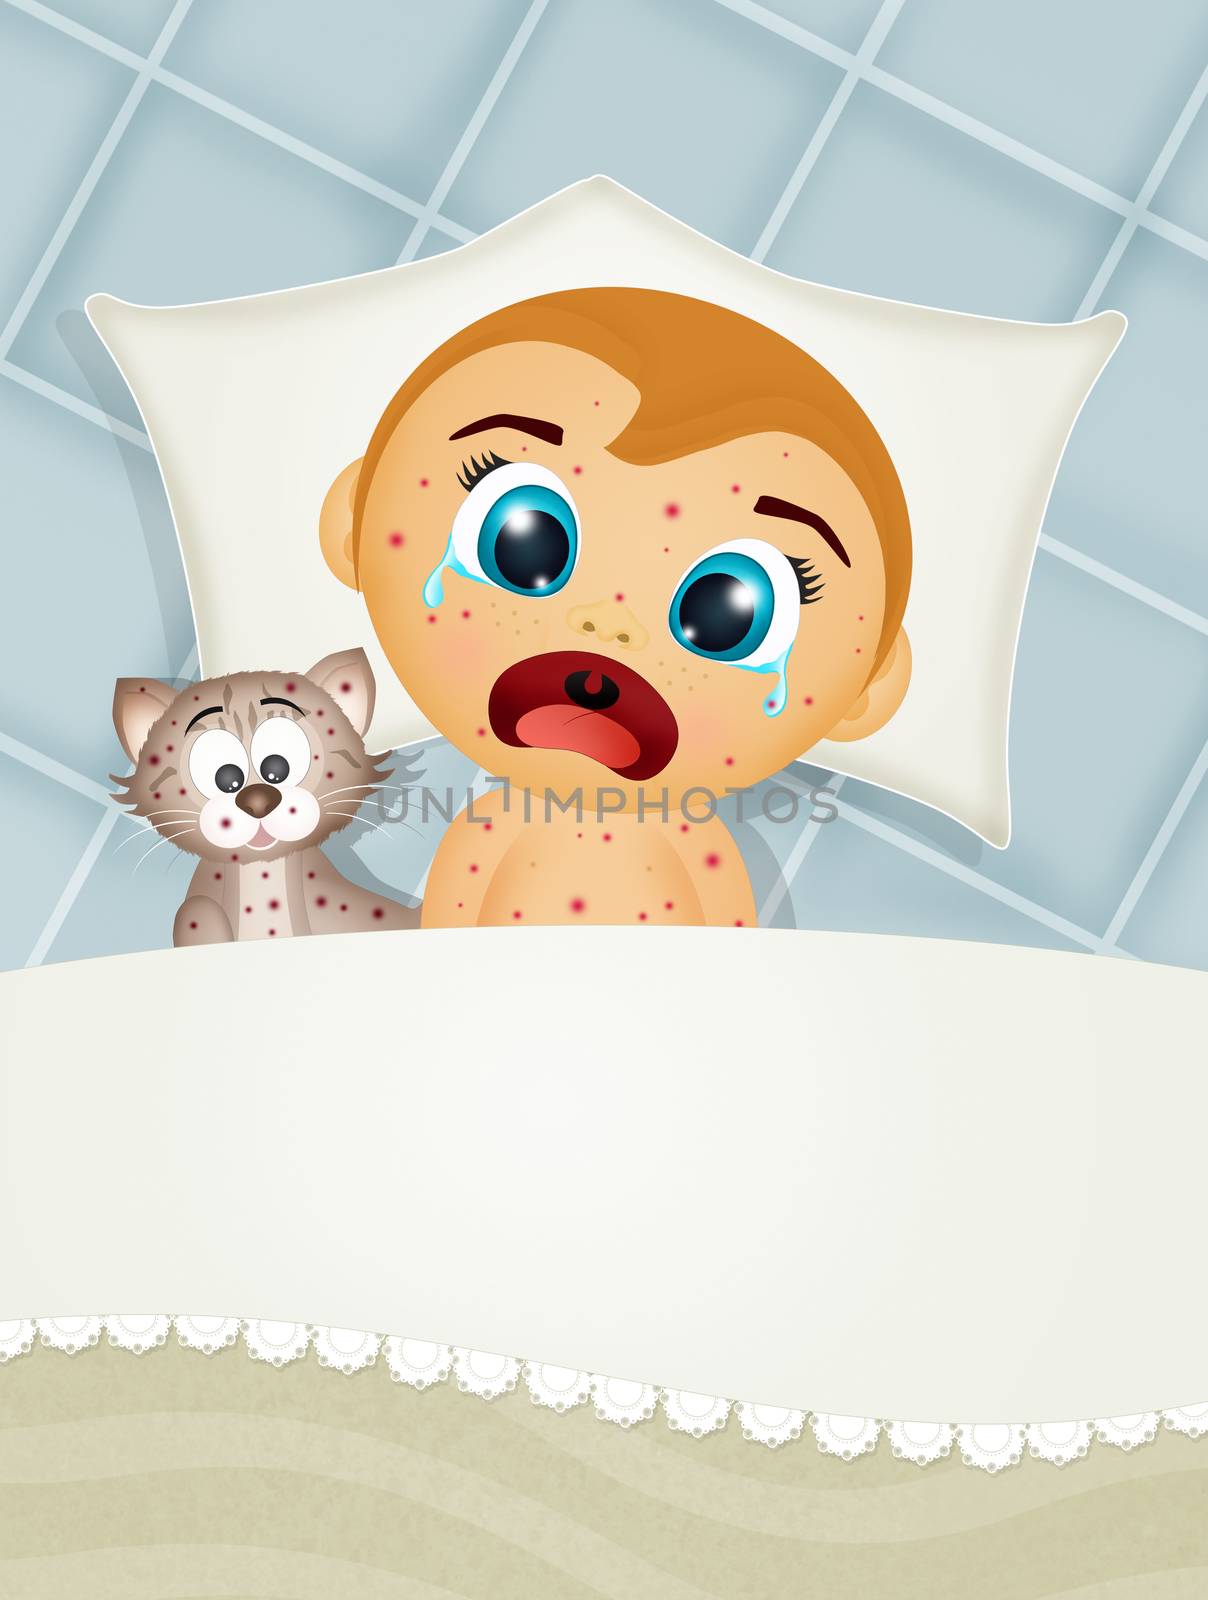 illustration of the baby with chickenpox in the bed